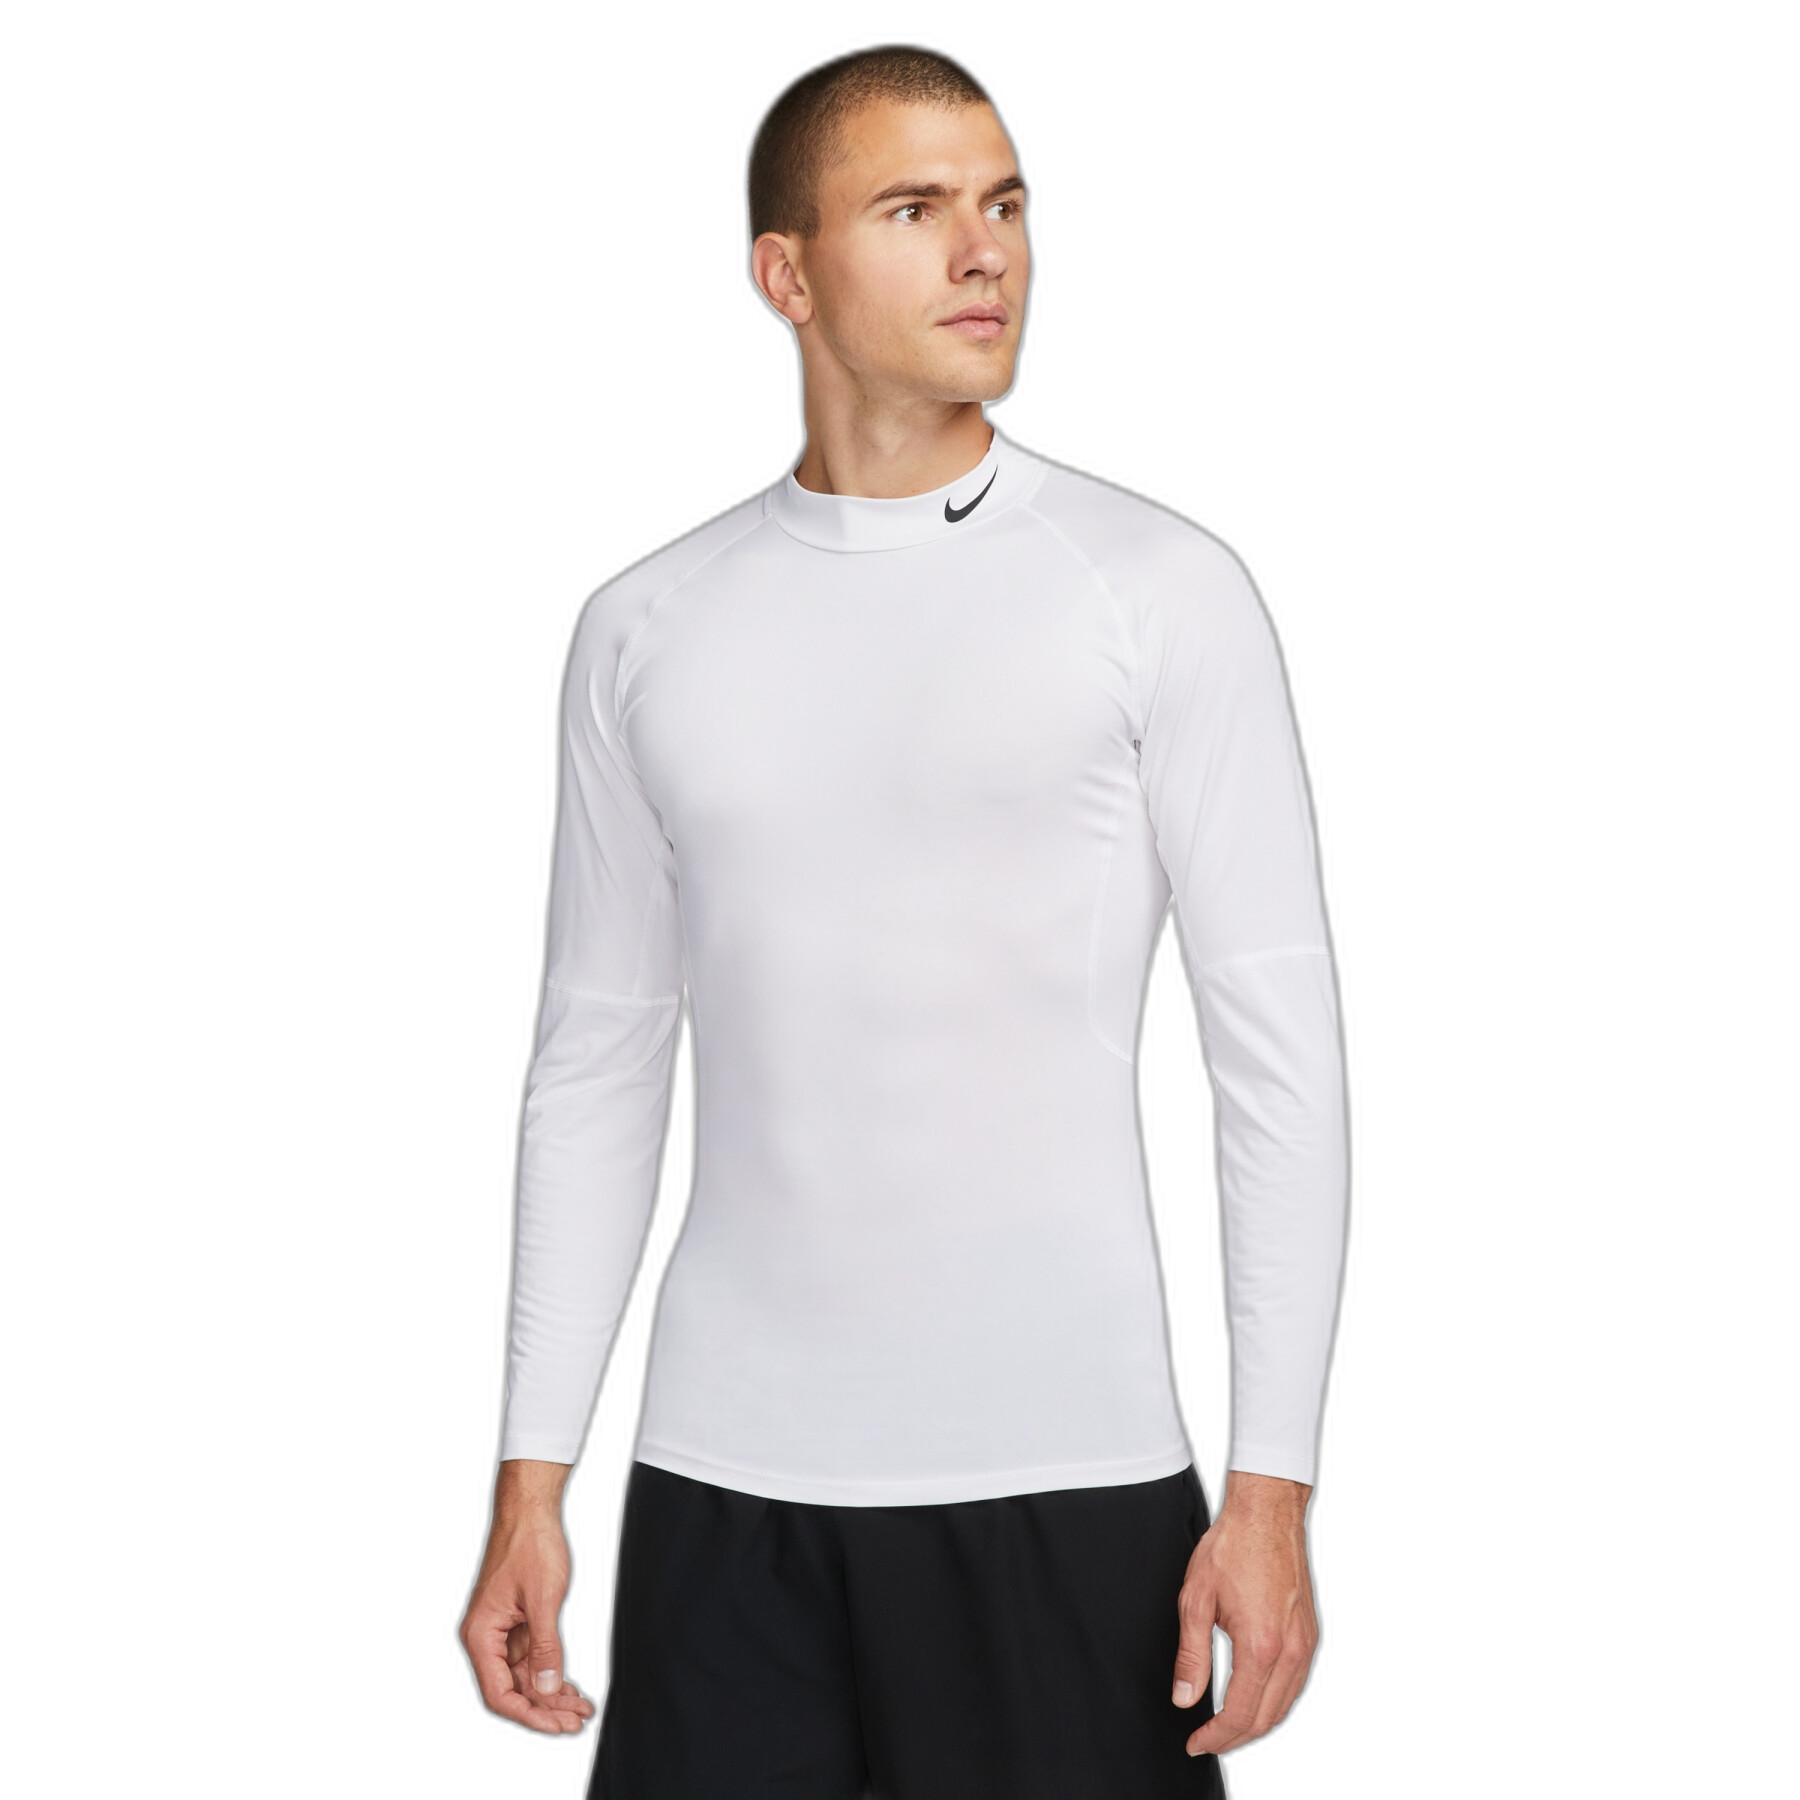 Long-sleeved tight-fitting jersey Nike Dri-FIT Mock